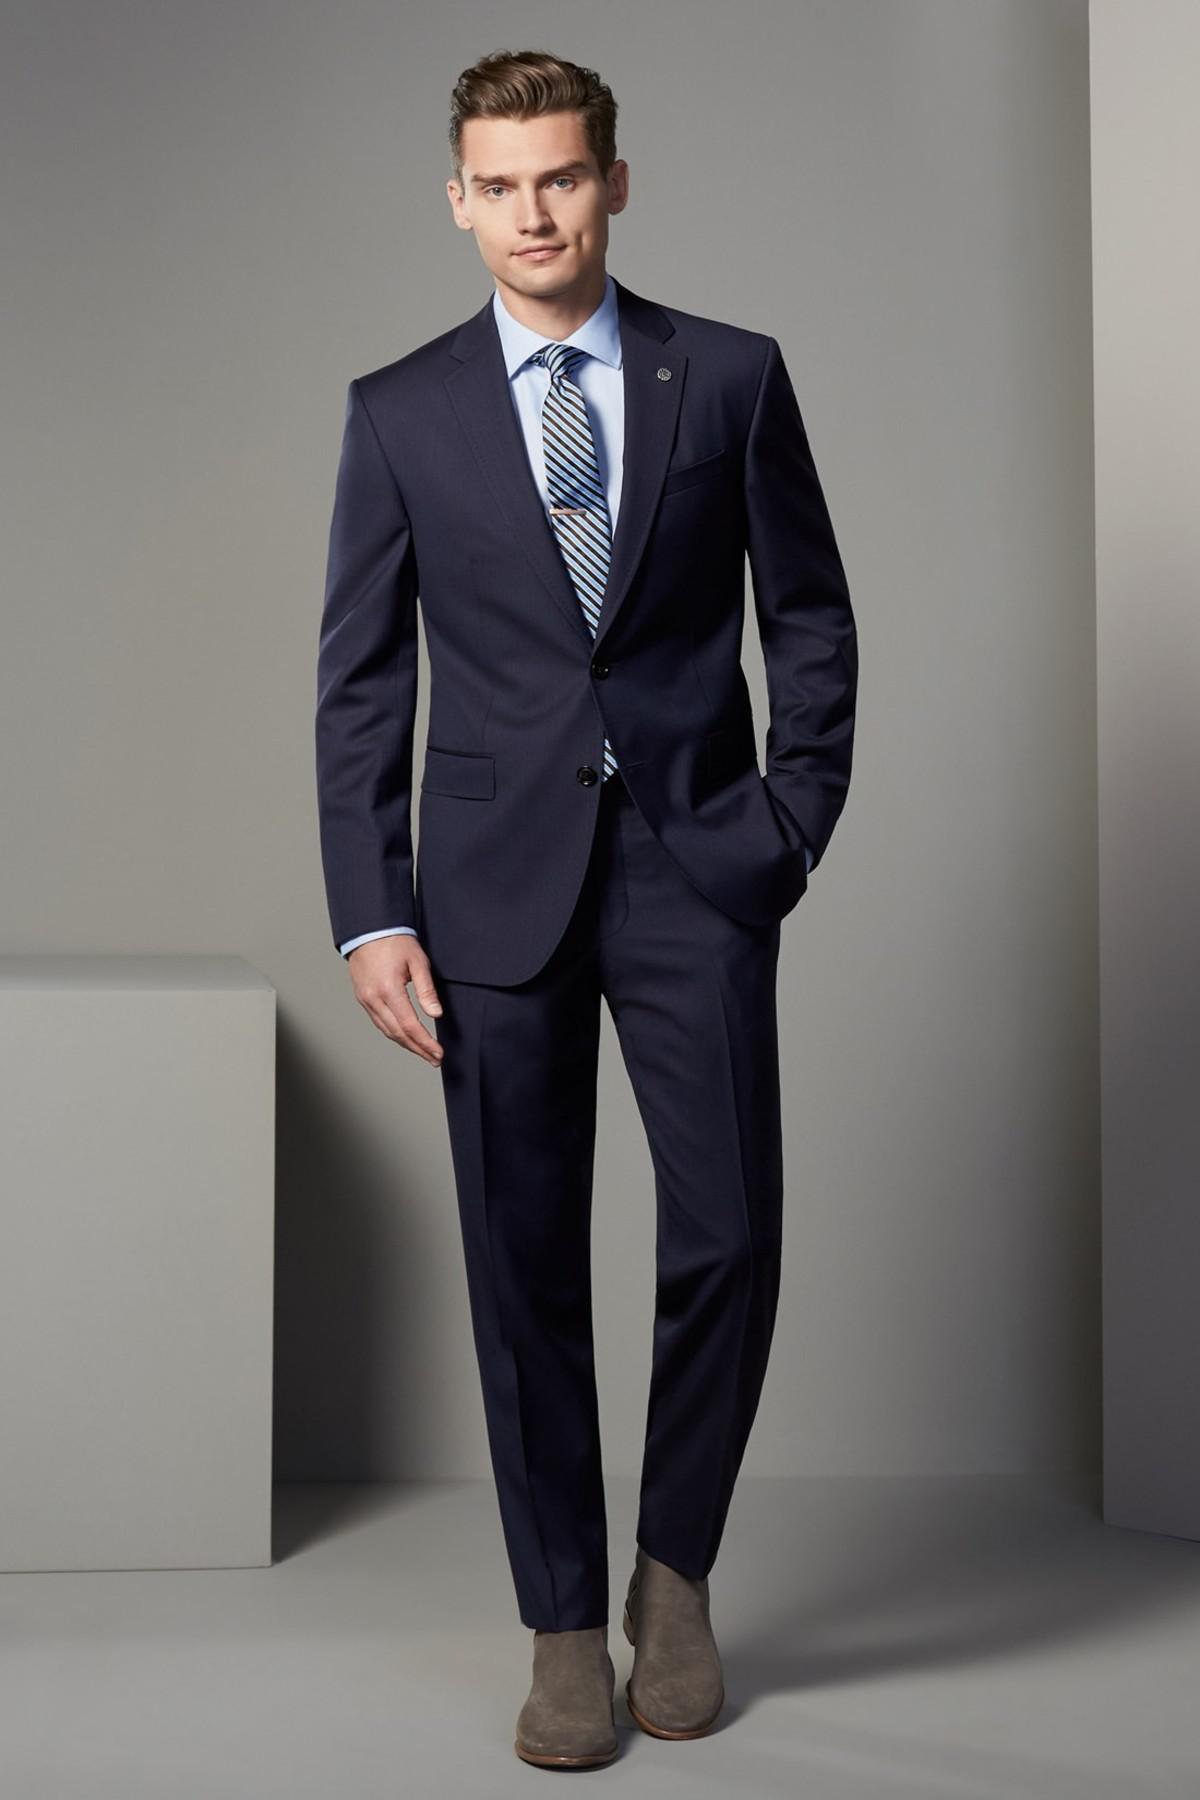 Ted Baker 'jay' Trim Fit Solid Wool Suit in Navy (Blue) for Men - Lyst